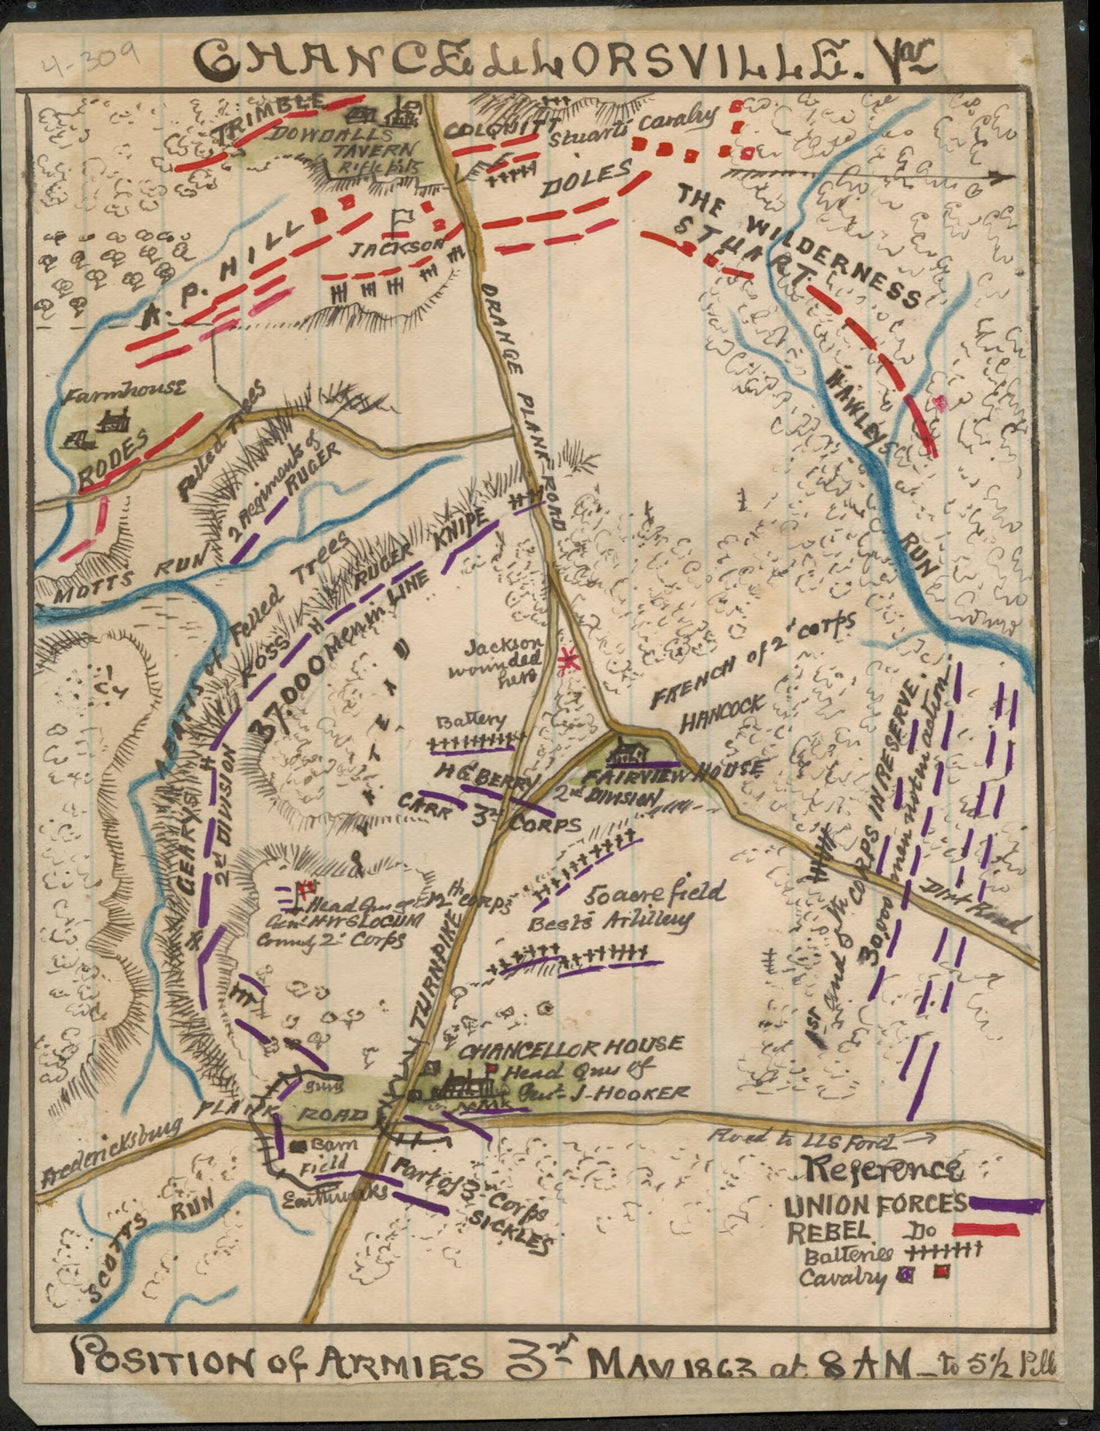 This old map of Chancellorsville, Va. Position of Armies 3rd May 1863 at 8 A.m. to 5 1/2 P.m from 05-03 was created by Robert Knox Sneden in 05-03